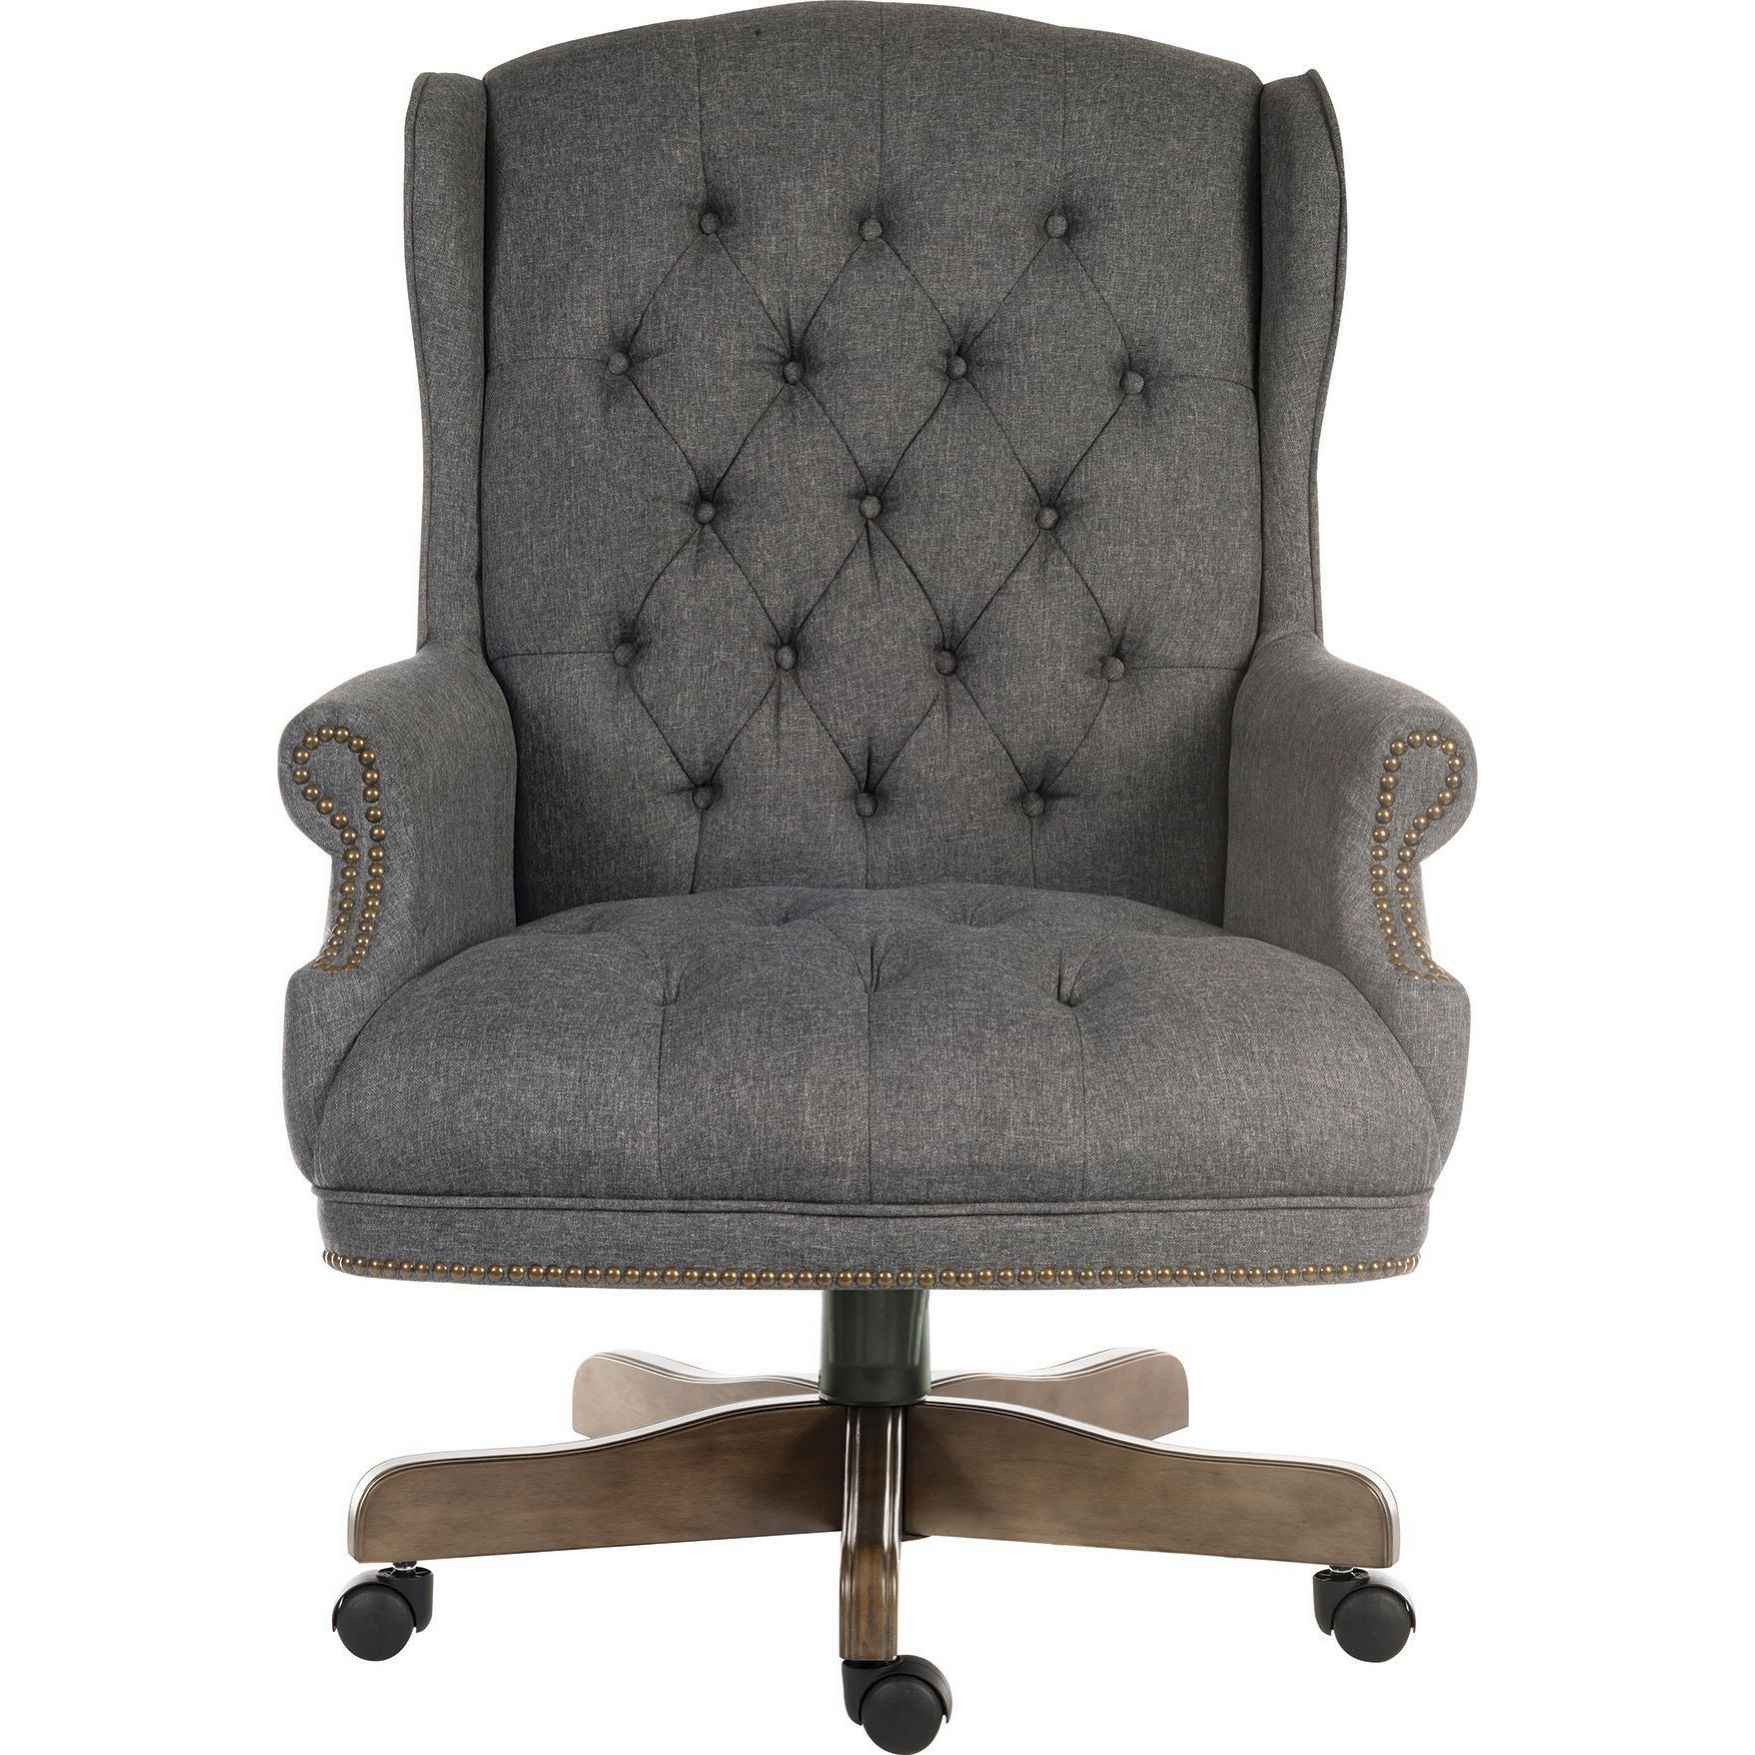 Chairman Grey Traditional Manager Chair | Executive Office Chairs